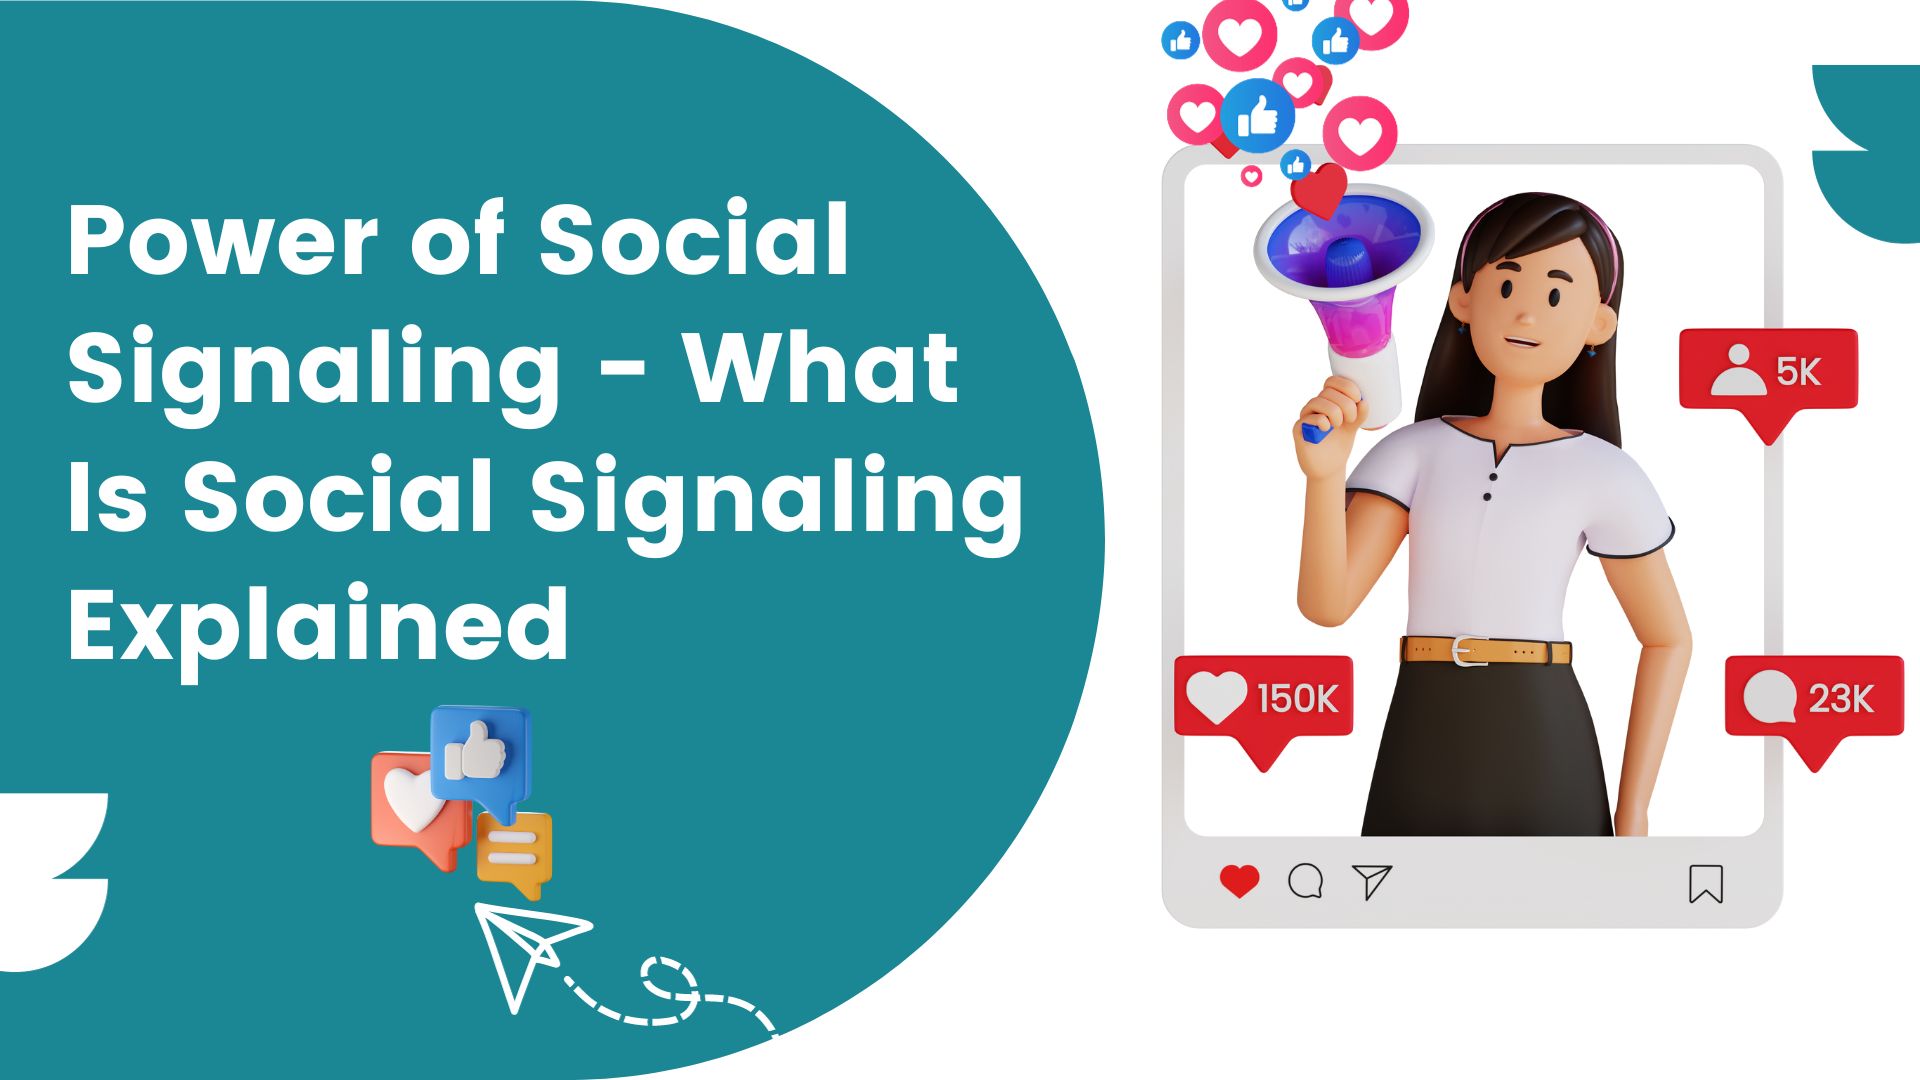 Power of Social Signaling - What Is Social Signaling Explained